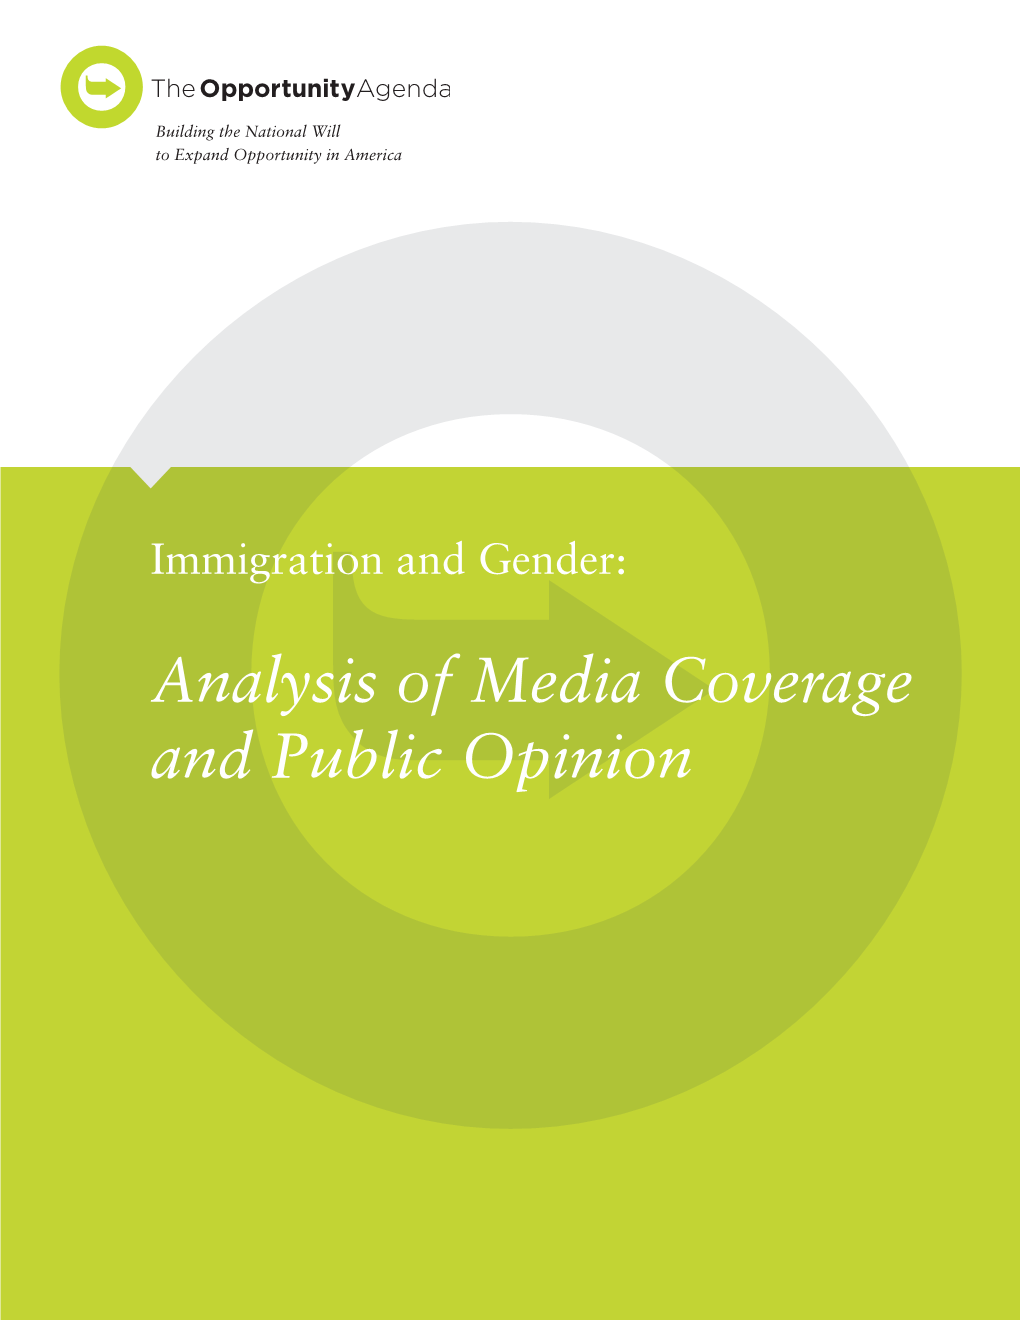 Immigration and Gender: Analysis of Media Coverage and Public Opinion the Opportunity Agenda